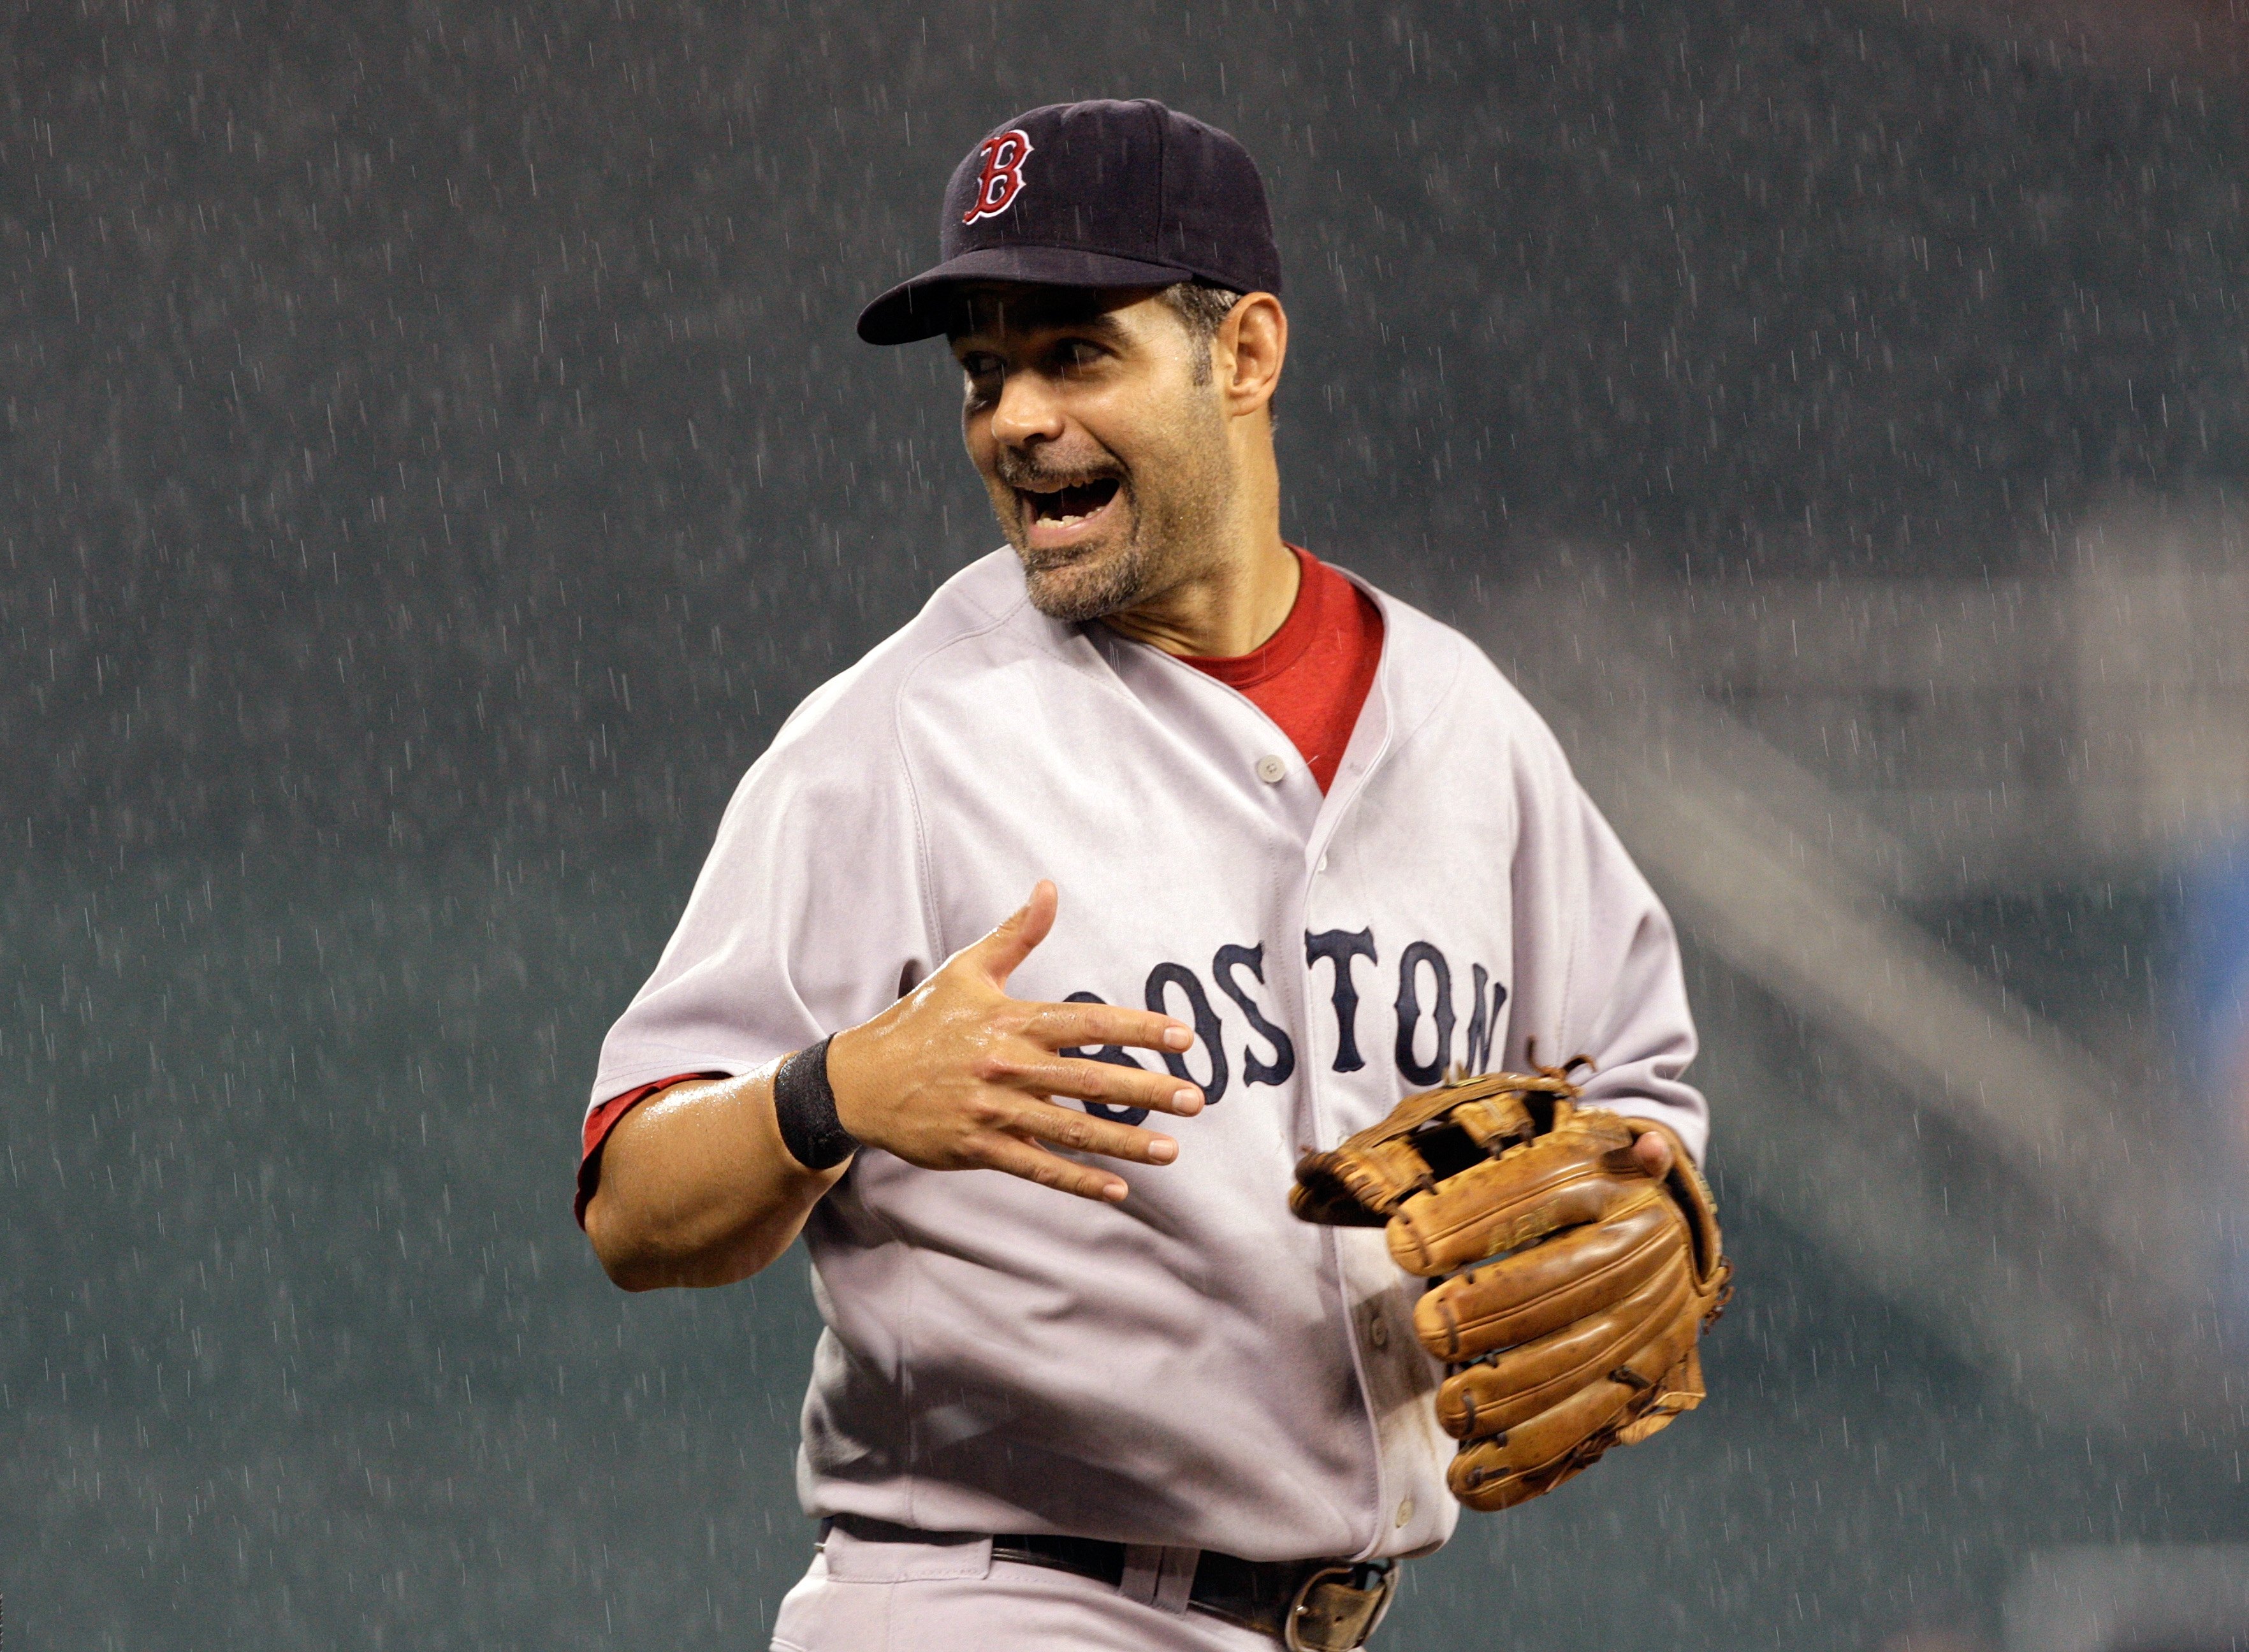 KANSAS CITY, KS - SEPTEMBER 21:  Mike Lowell #25 of the Boston Red Sox reacts during the game against the Kansas City Royals on September 21, 2009 at Kauffman Stadium in Kansas City, Missouri. The Royals defeated the Red Sox 12-9. (Photo by Jamie Squire/G